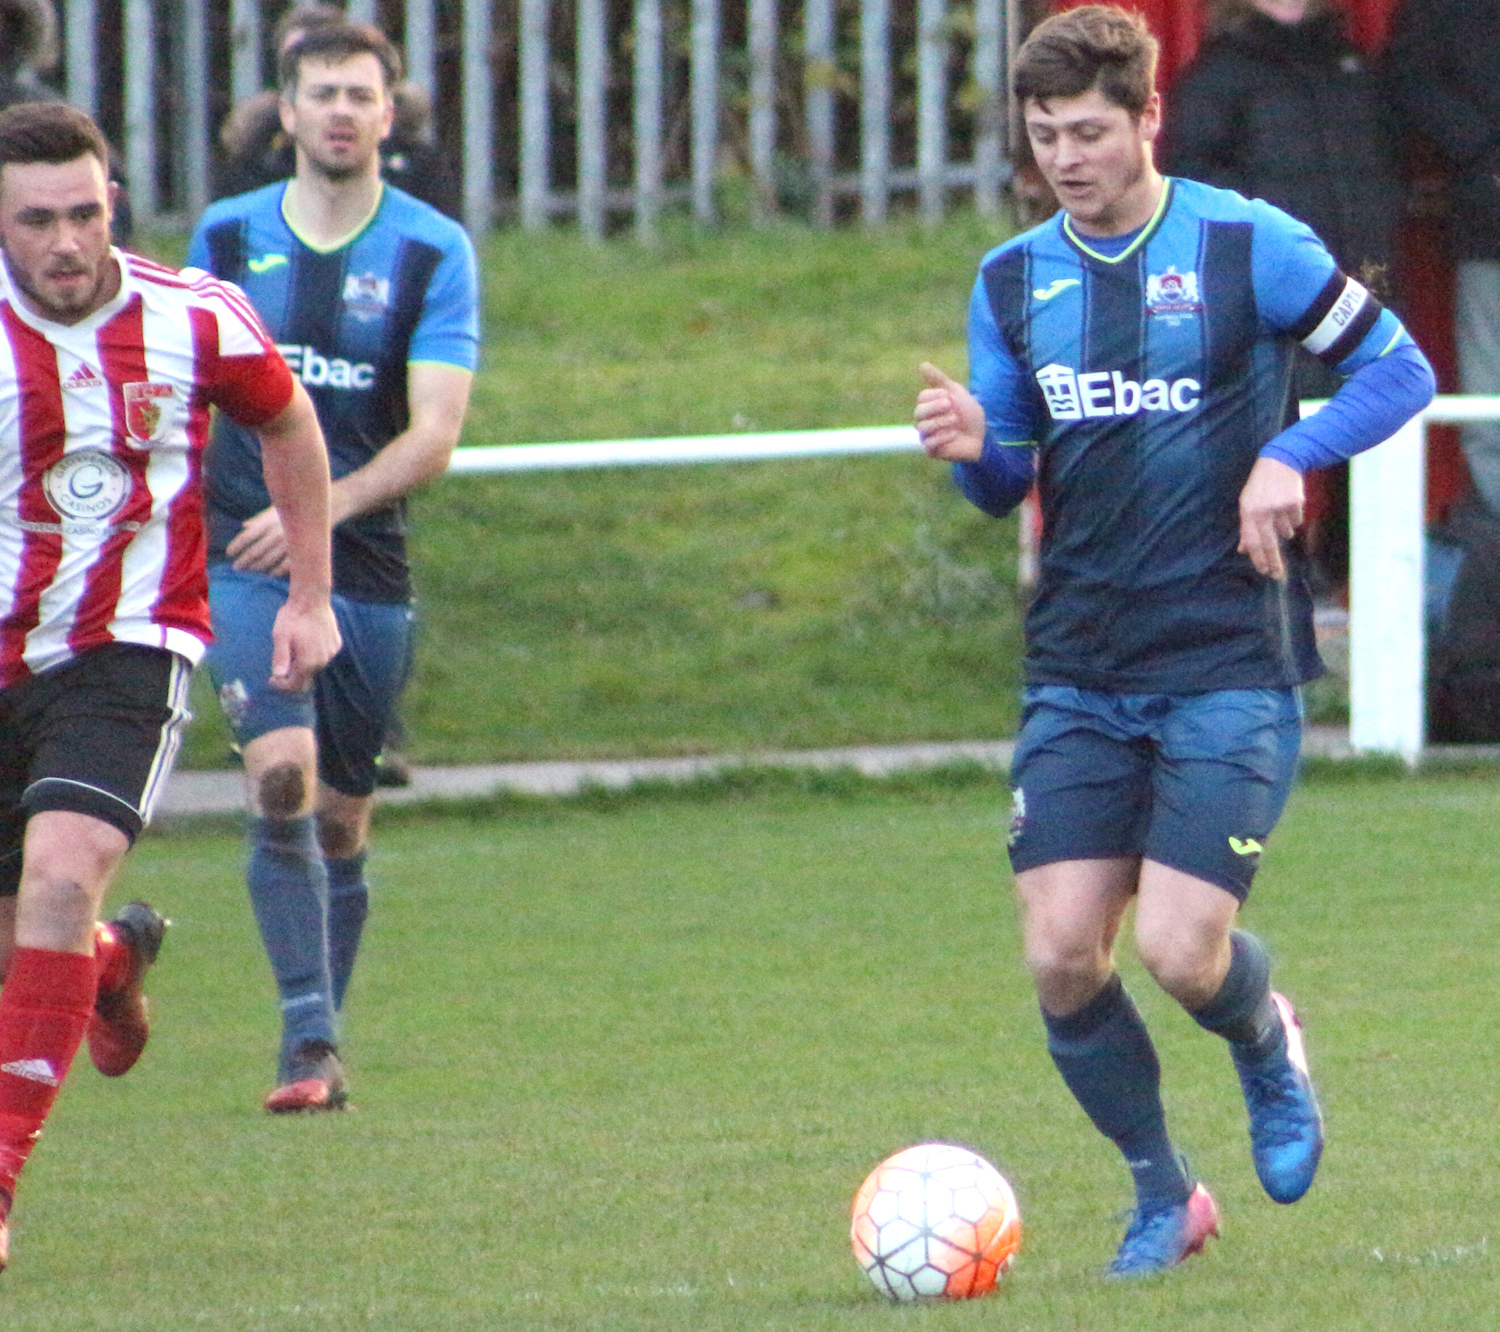 Aycliffe Take 3 Goals & 3 Points from Billingham Game